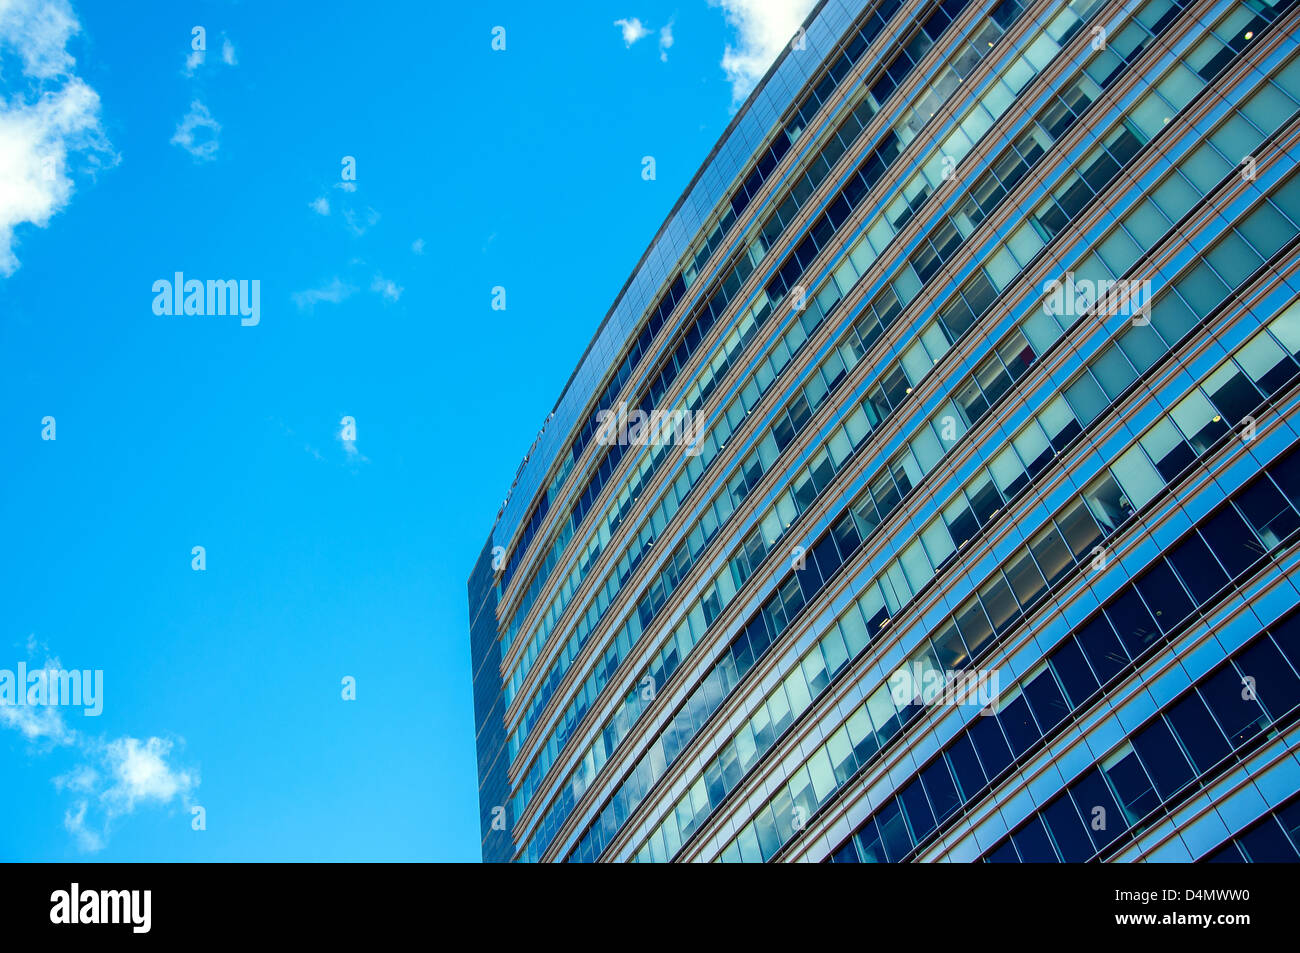 Details of a blue tinted office building against a beautiful blue sky. Stock Photo